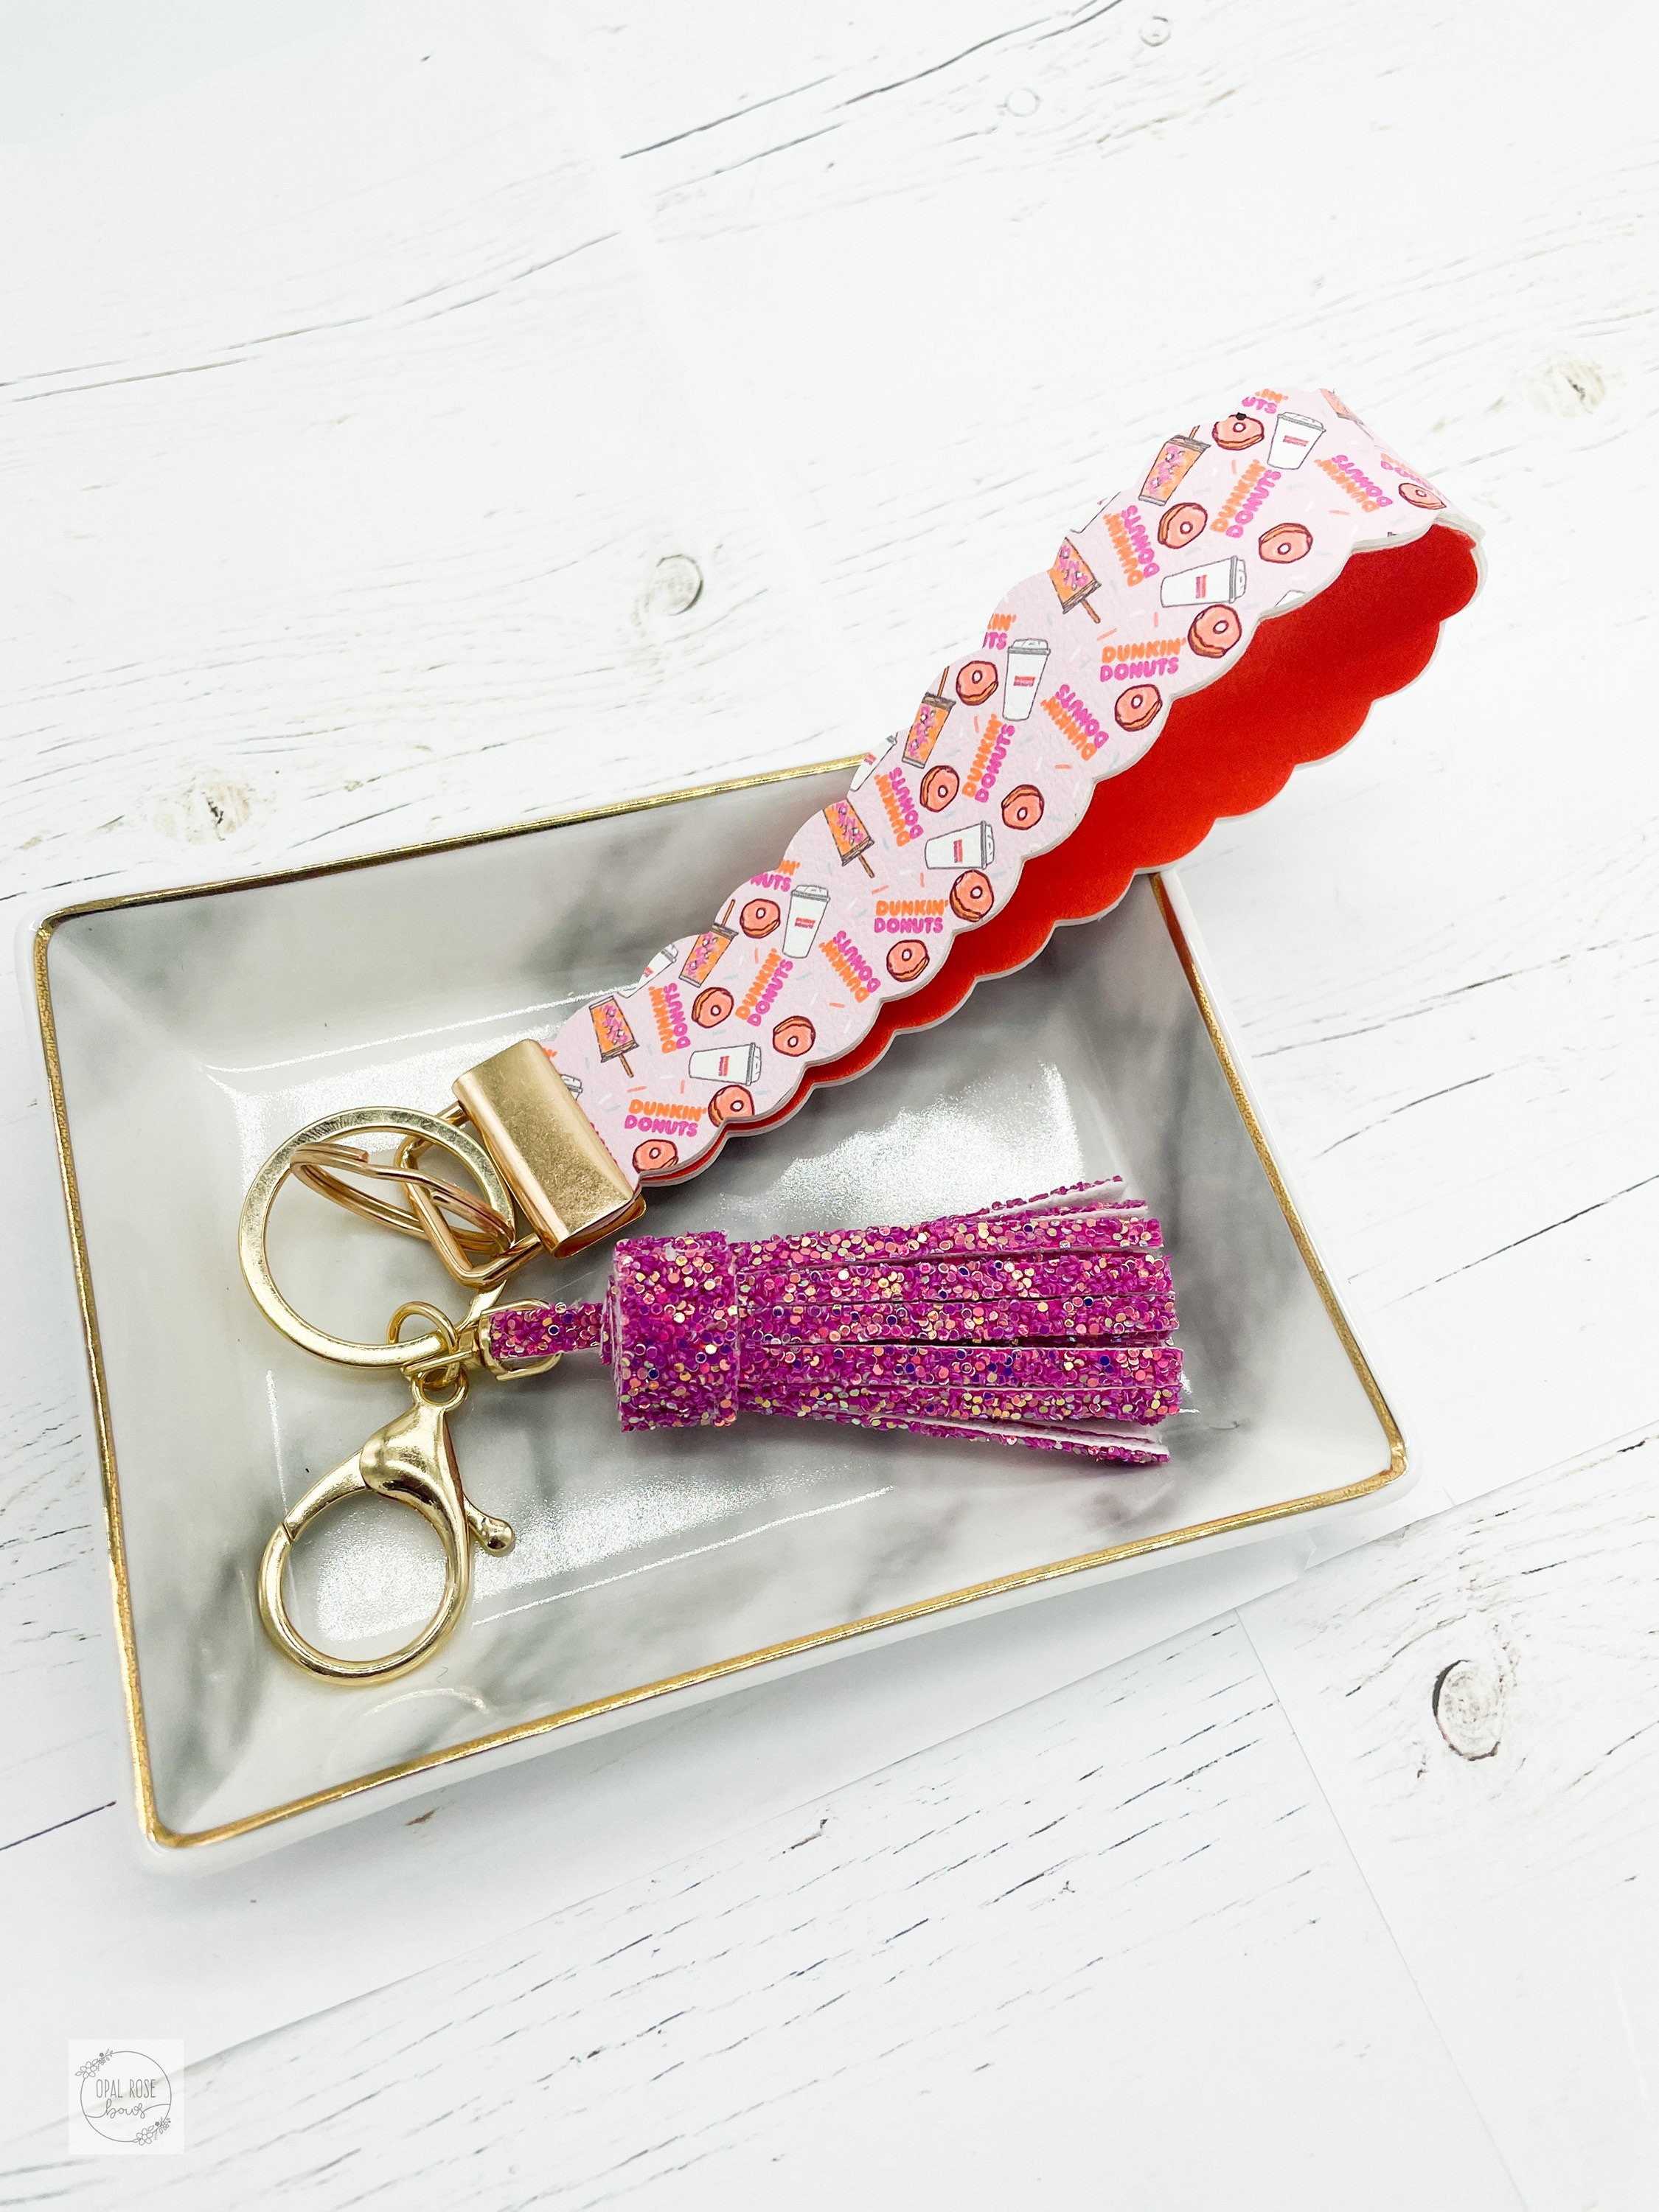 Details about   Dunkin Donuts Print Ribbon on Strong Webbing Key Fob Key Chain Wristlet 